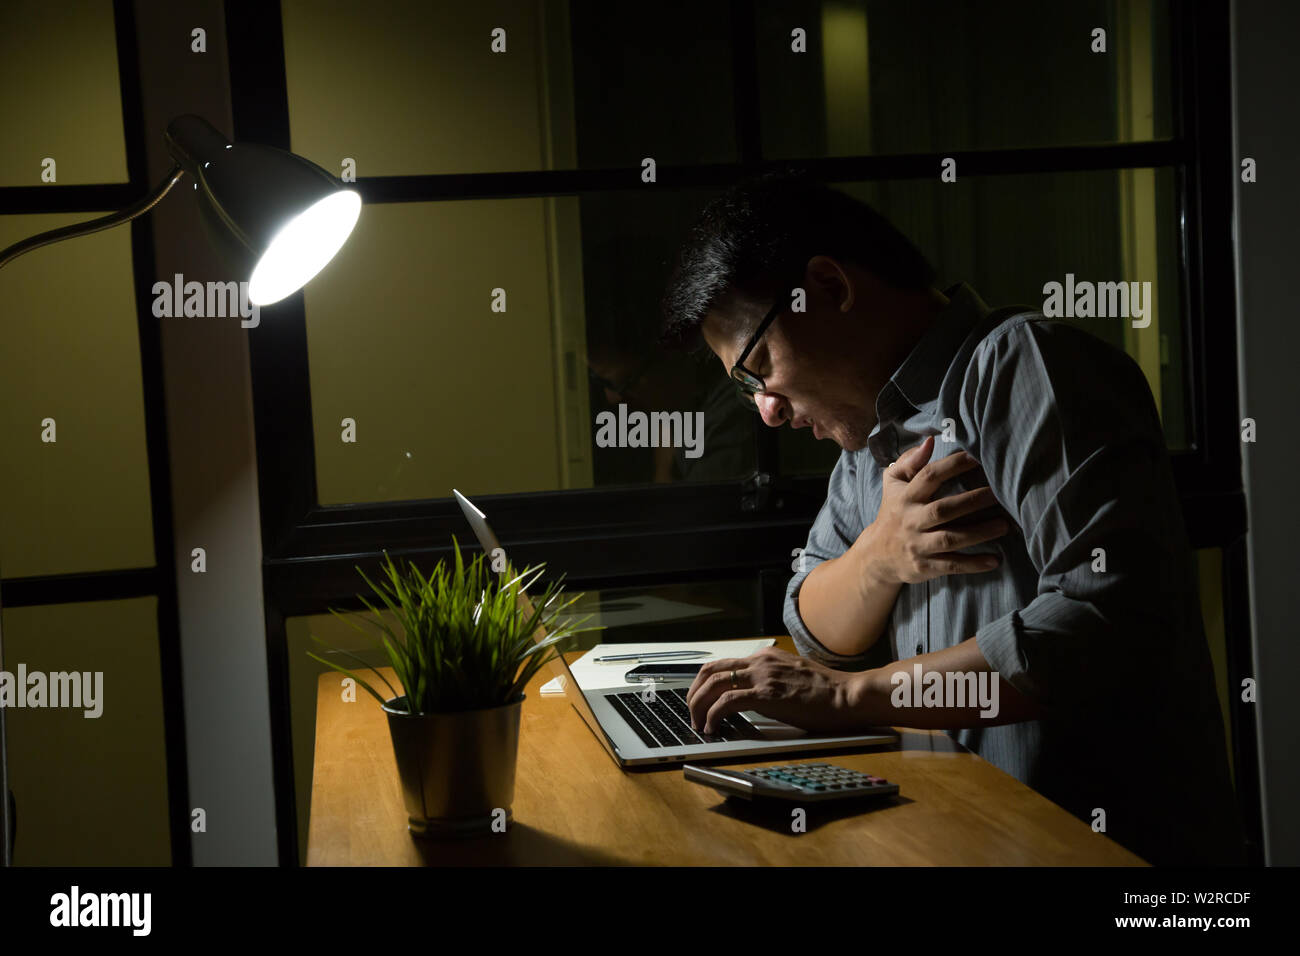 Symptoms of heart disease during overtime at night in the office, Working late and healthy concept Stock Photo